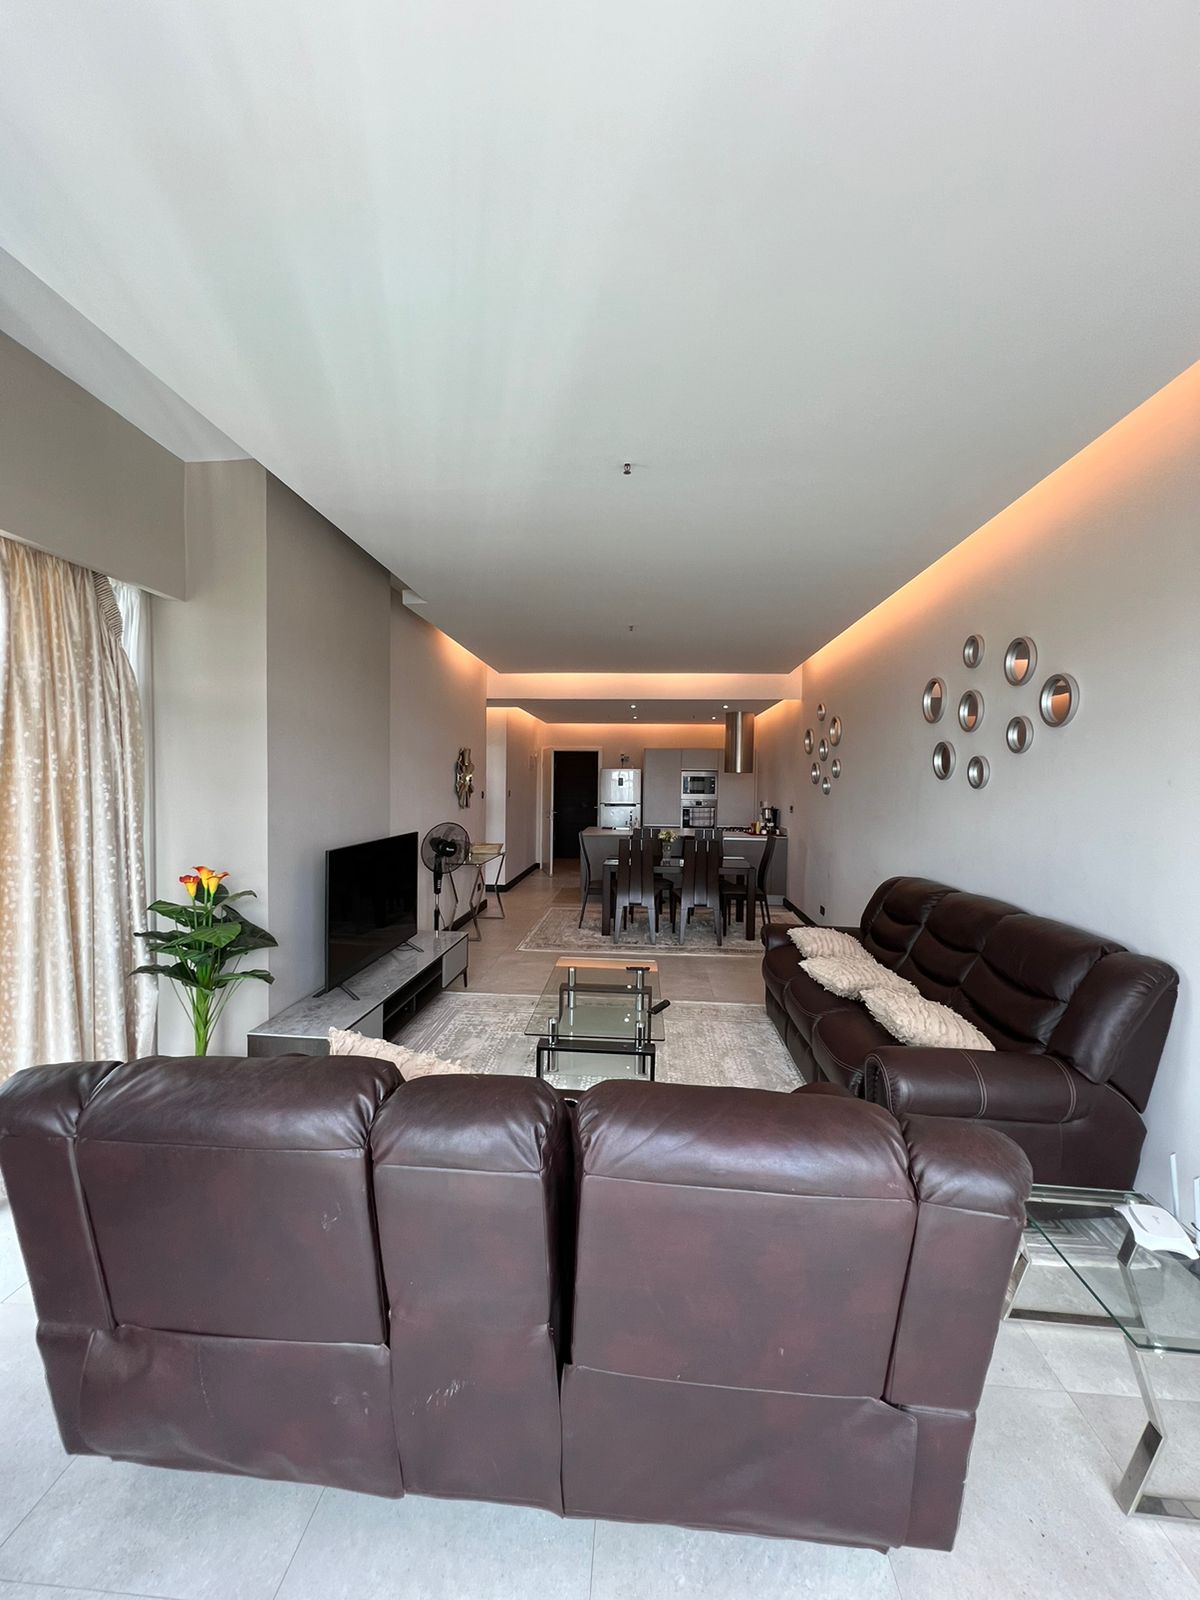 2 bedroom apartment for sale in Westlands. Size in sqft 1237sq ft. Asking price is 19Million Musilli Homes